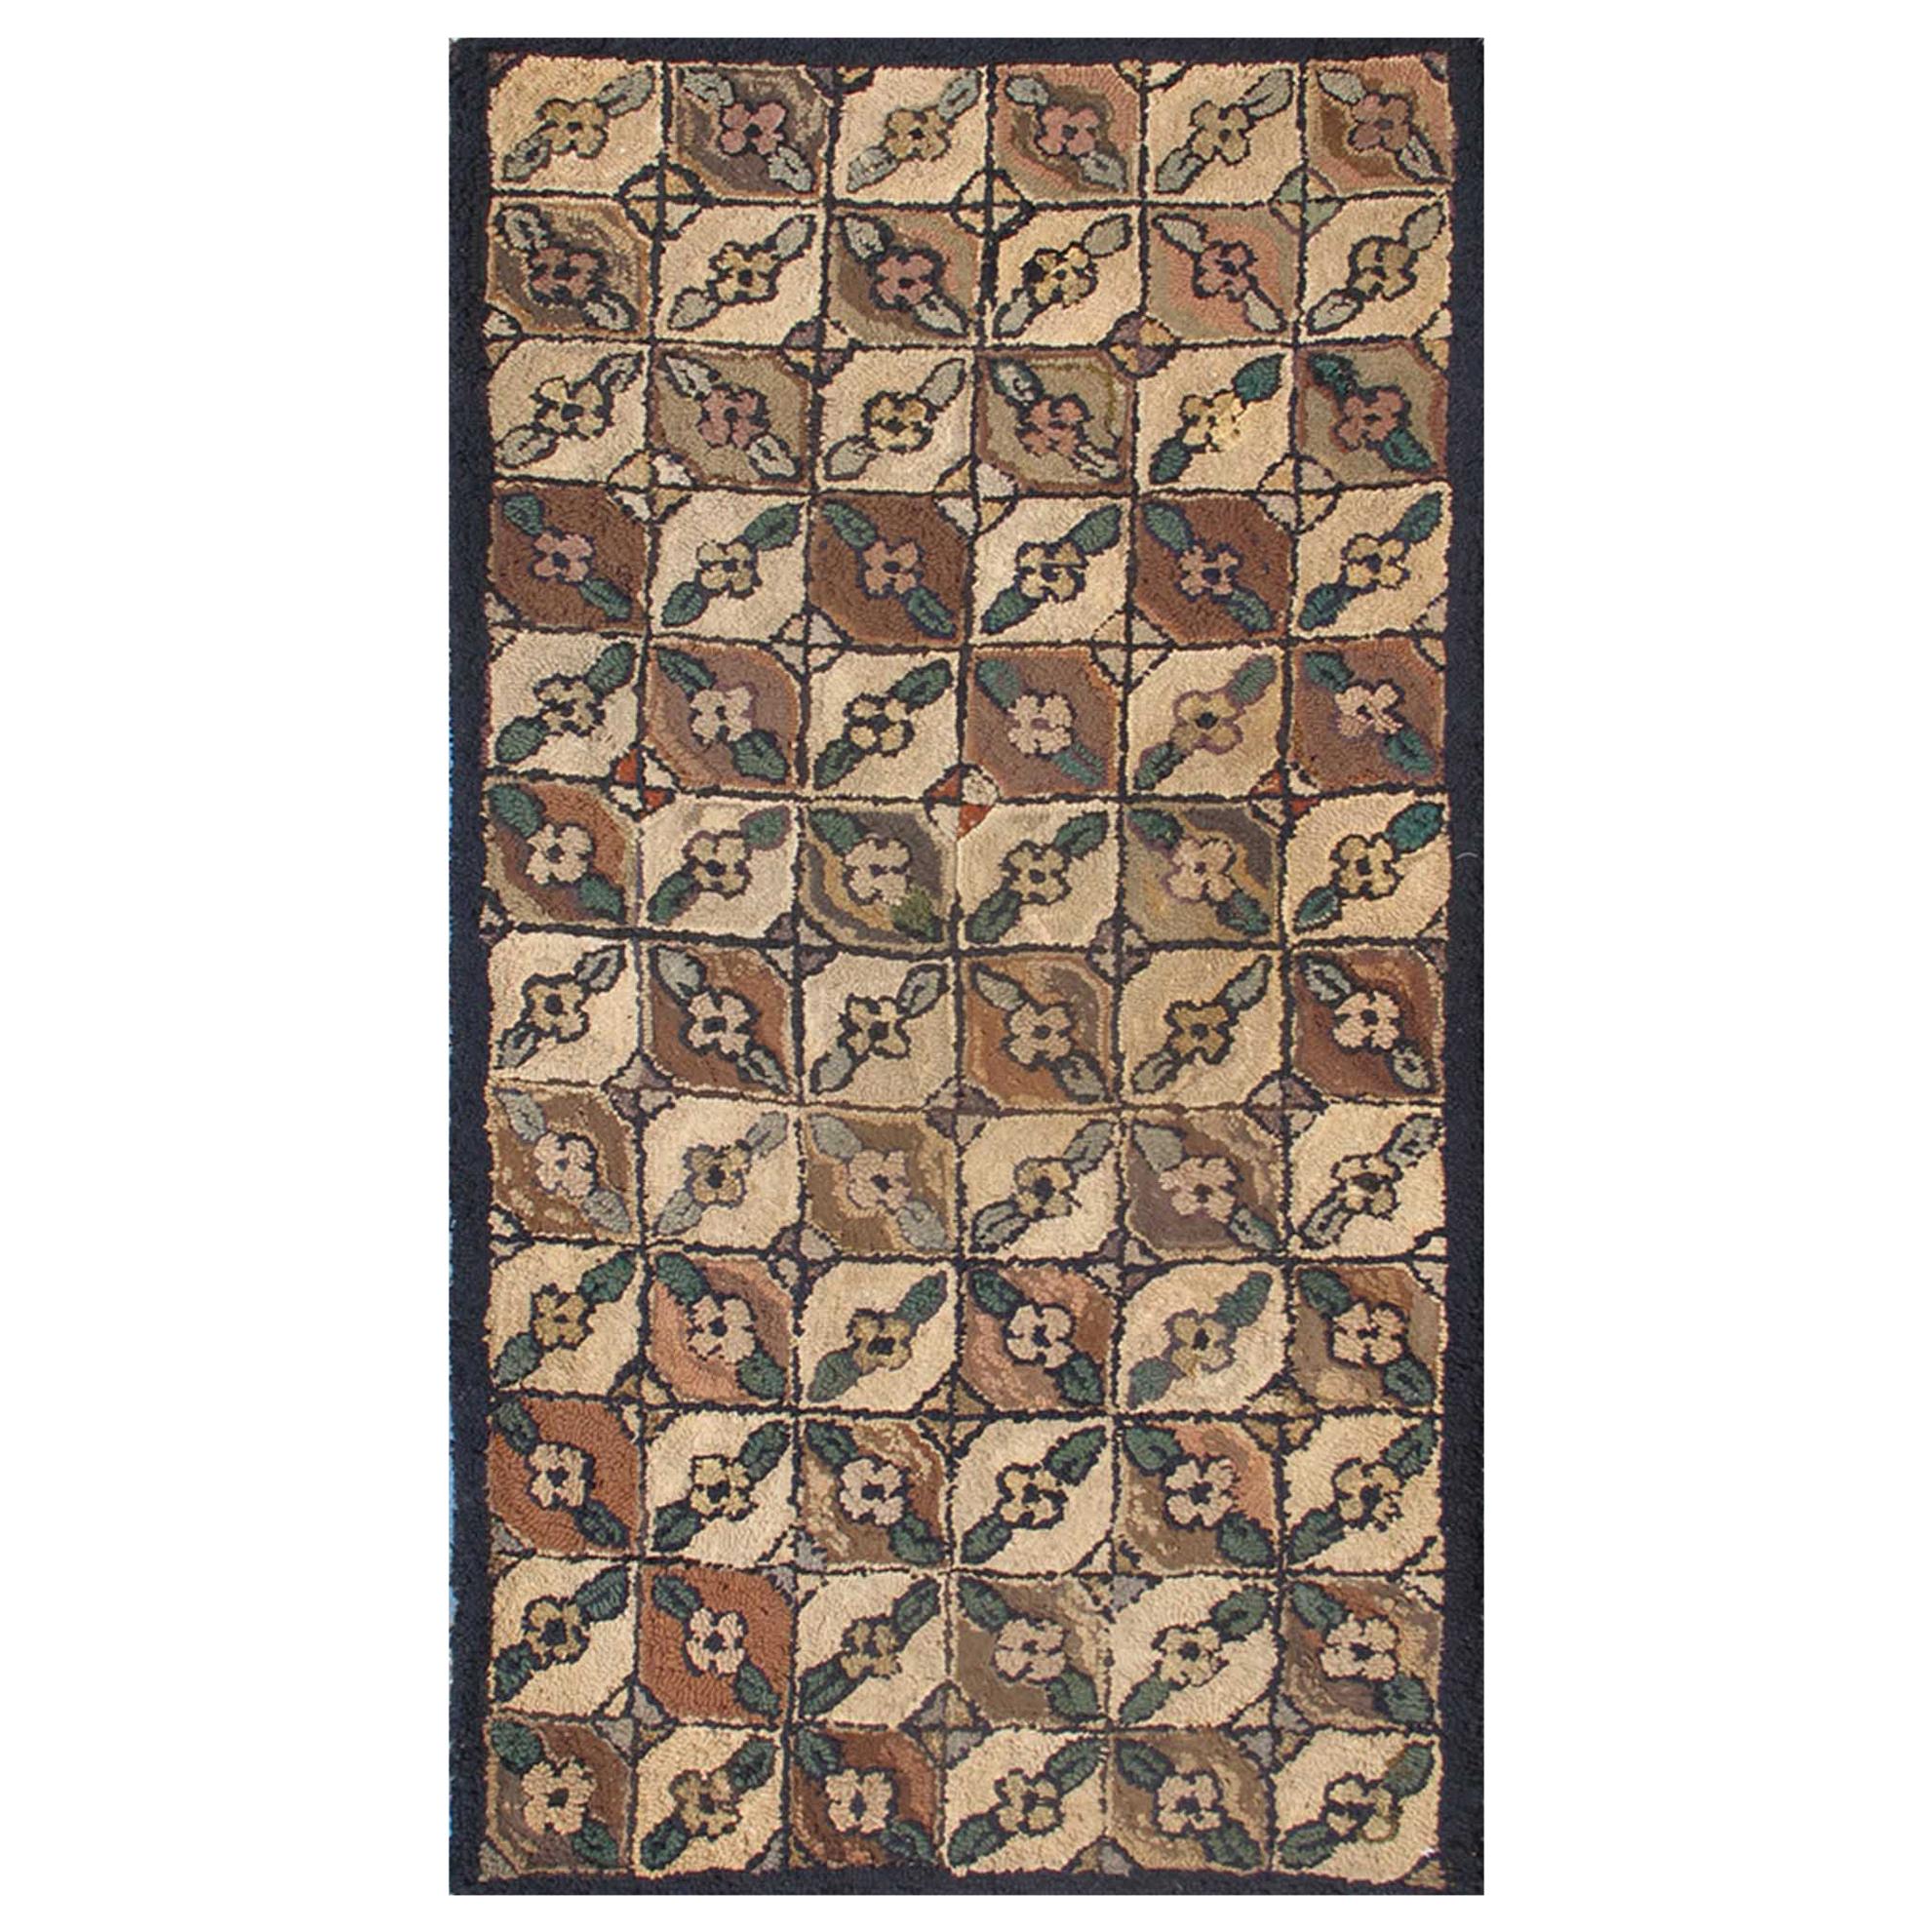 Checkered and Leaf Design American Hooked Rug in Earth Tones